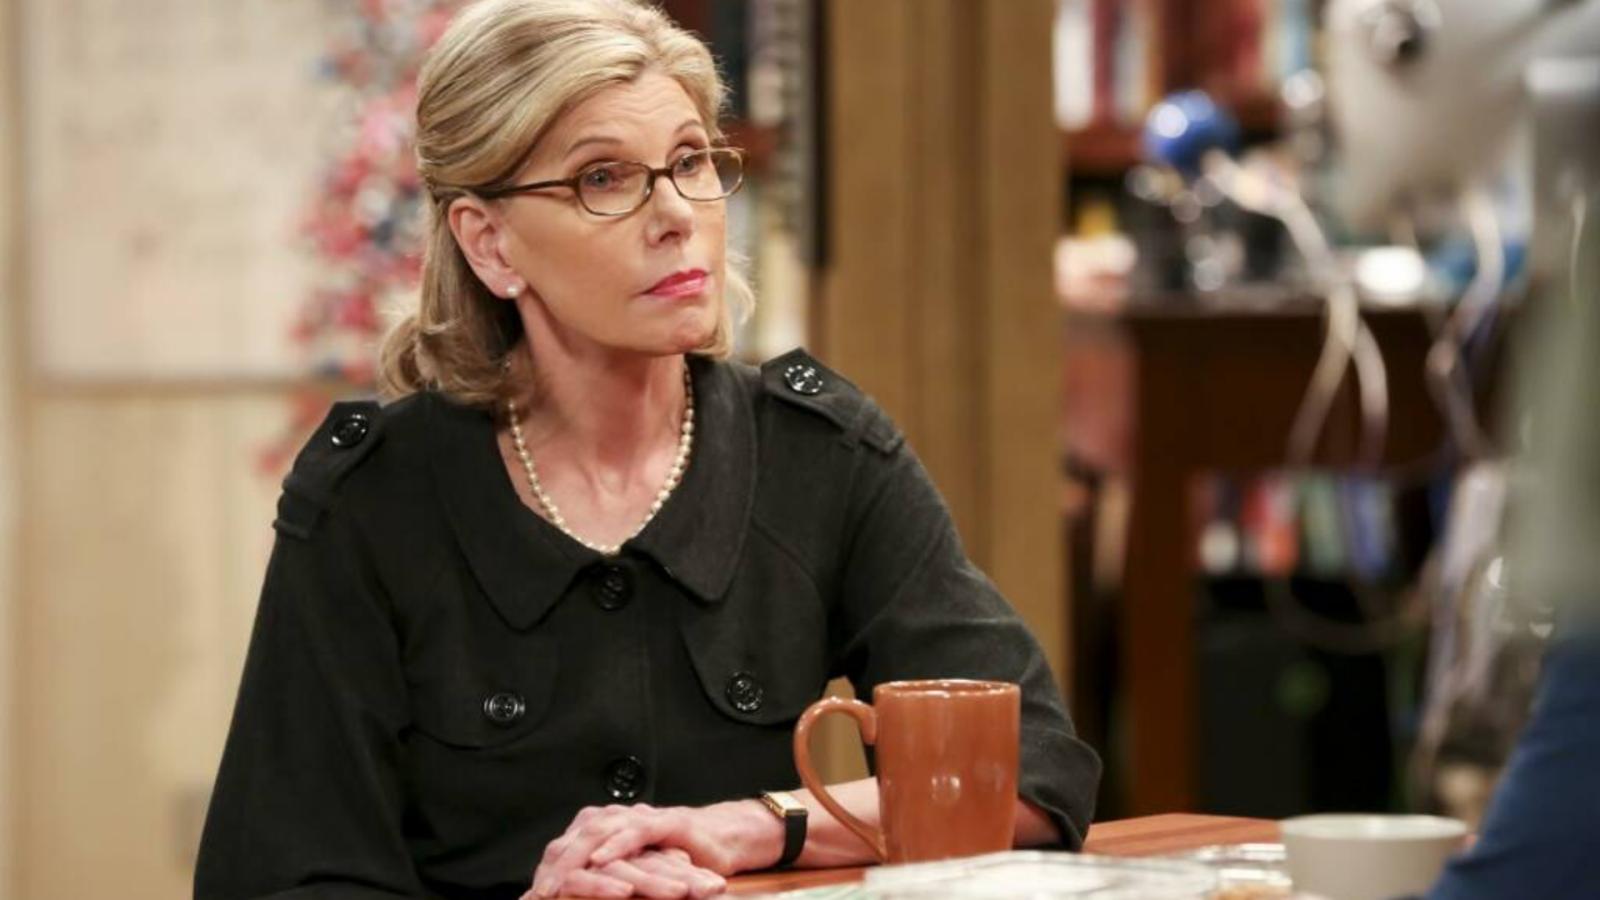 Which Big Bang Theory Character is Your Zodiac Match? - image 10